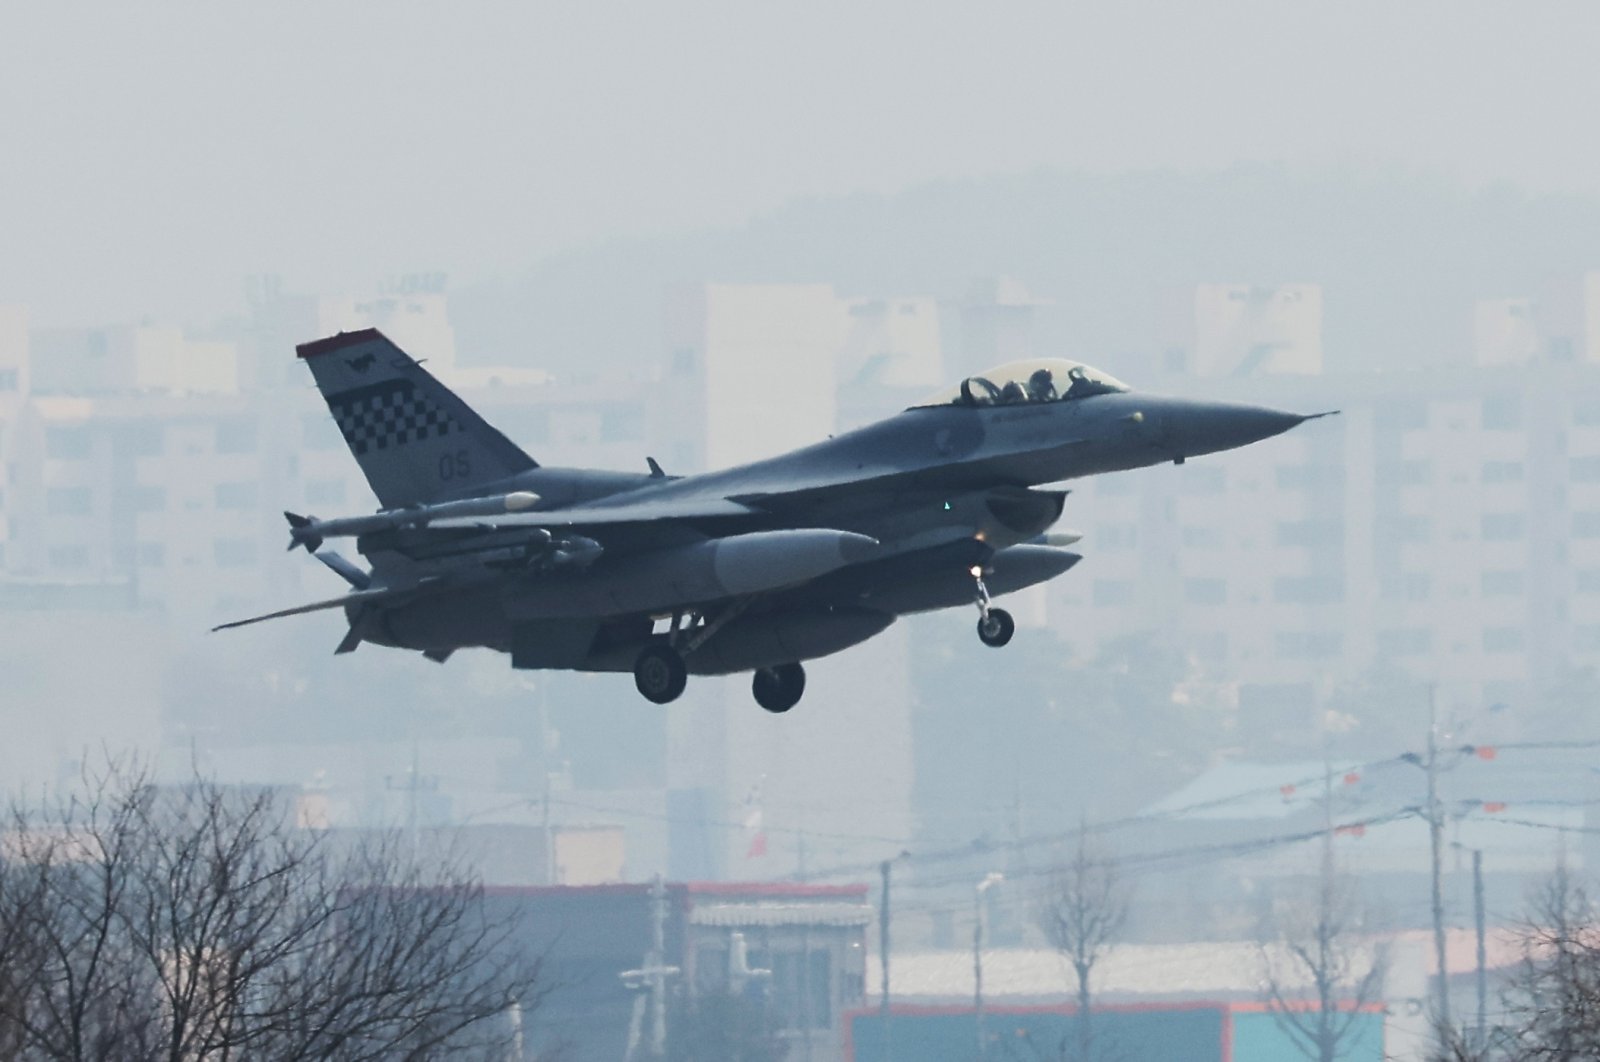 An F-16 fighter jet of the U.S. Air Force lands at the Osan Air Base in Pyeongtaek, South Korea, March 16, 2022. (EPA Photo)